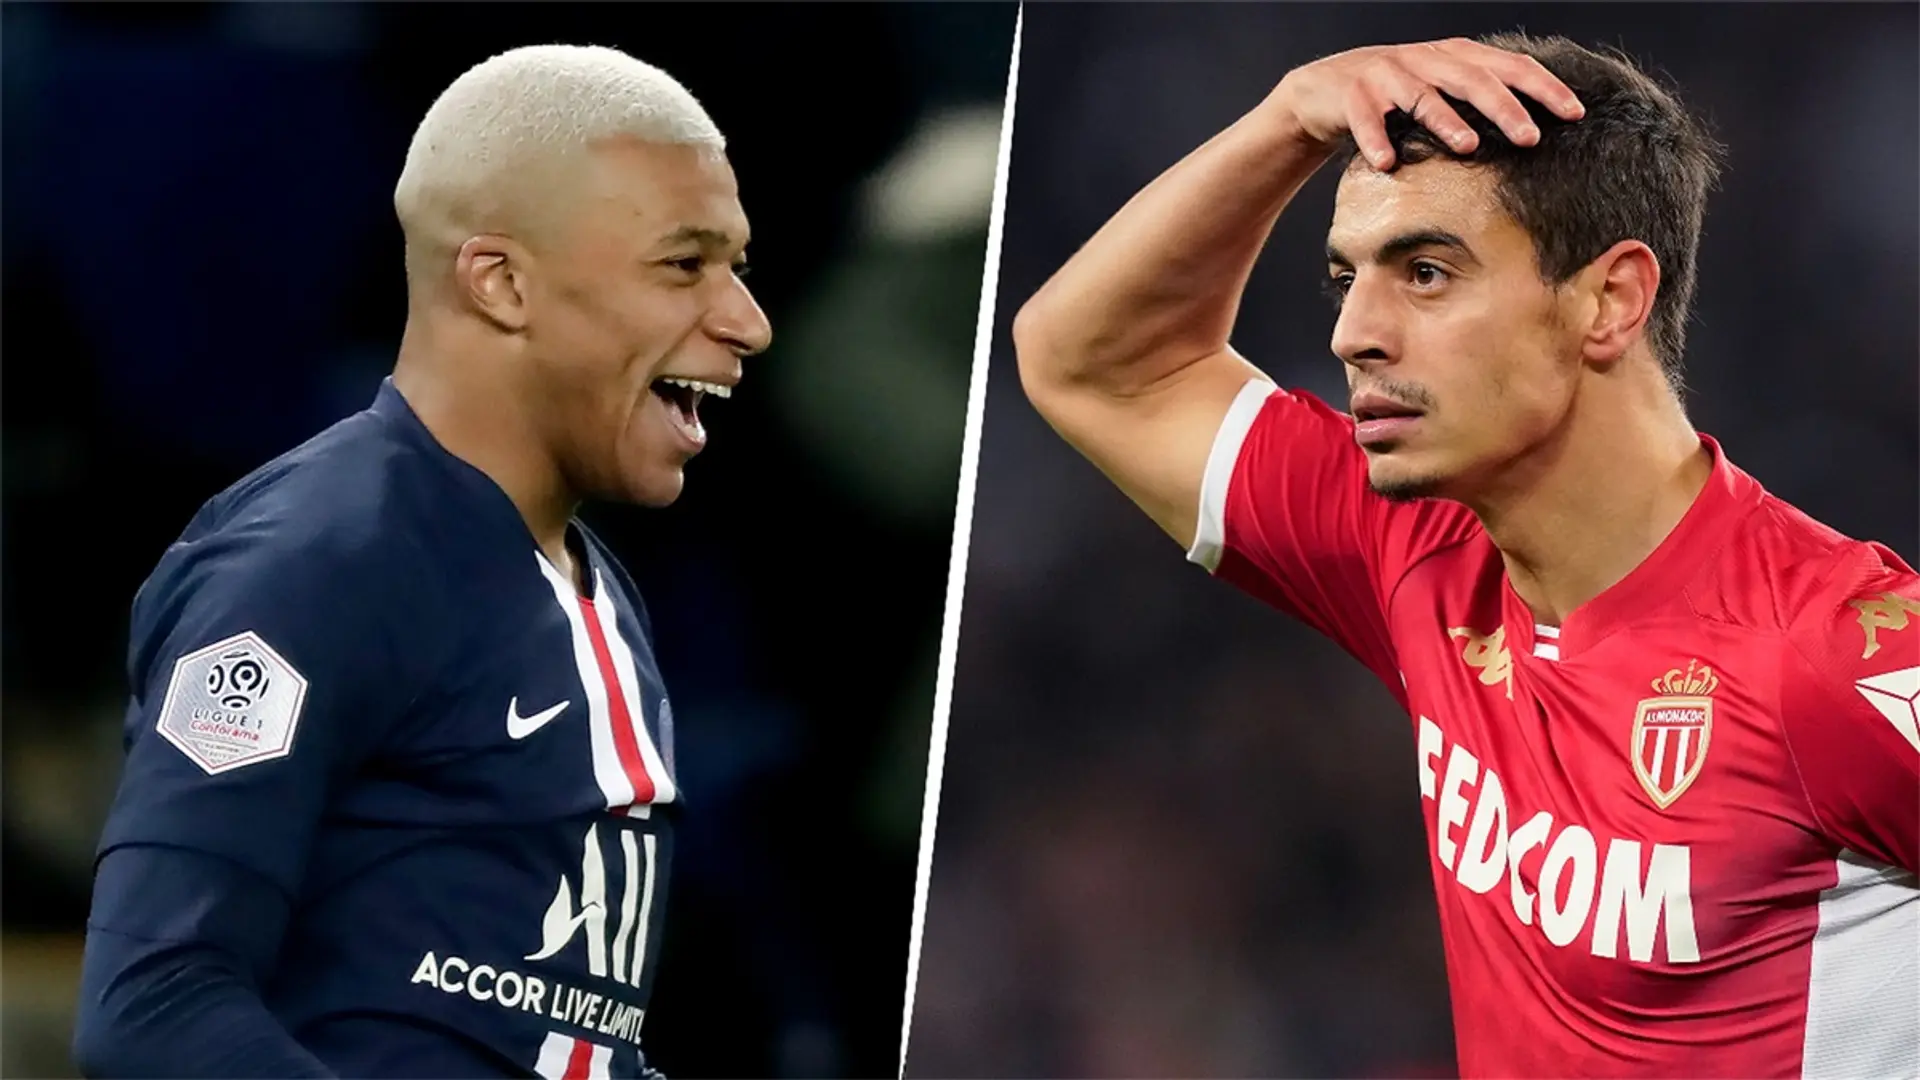 'Wissam also deserves a trophy, just like in the Premier League last season': Mbappe compassionately offers to share Ligue 1 top goalscorer award